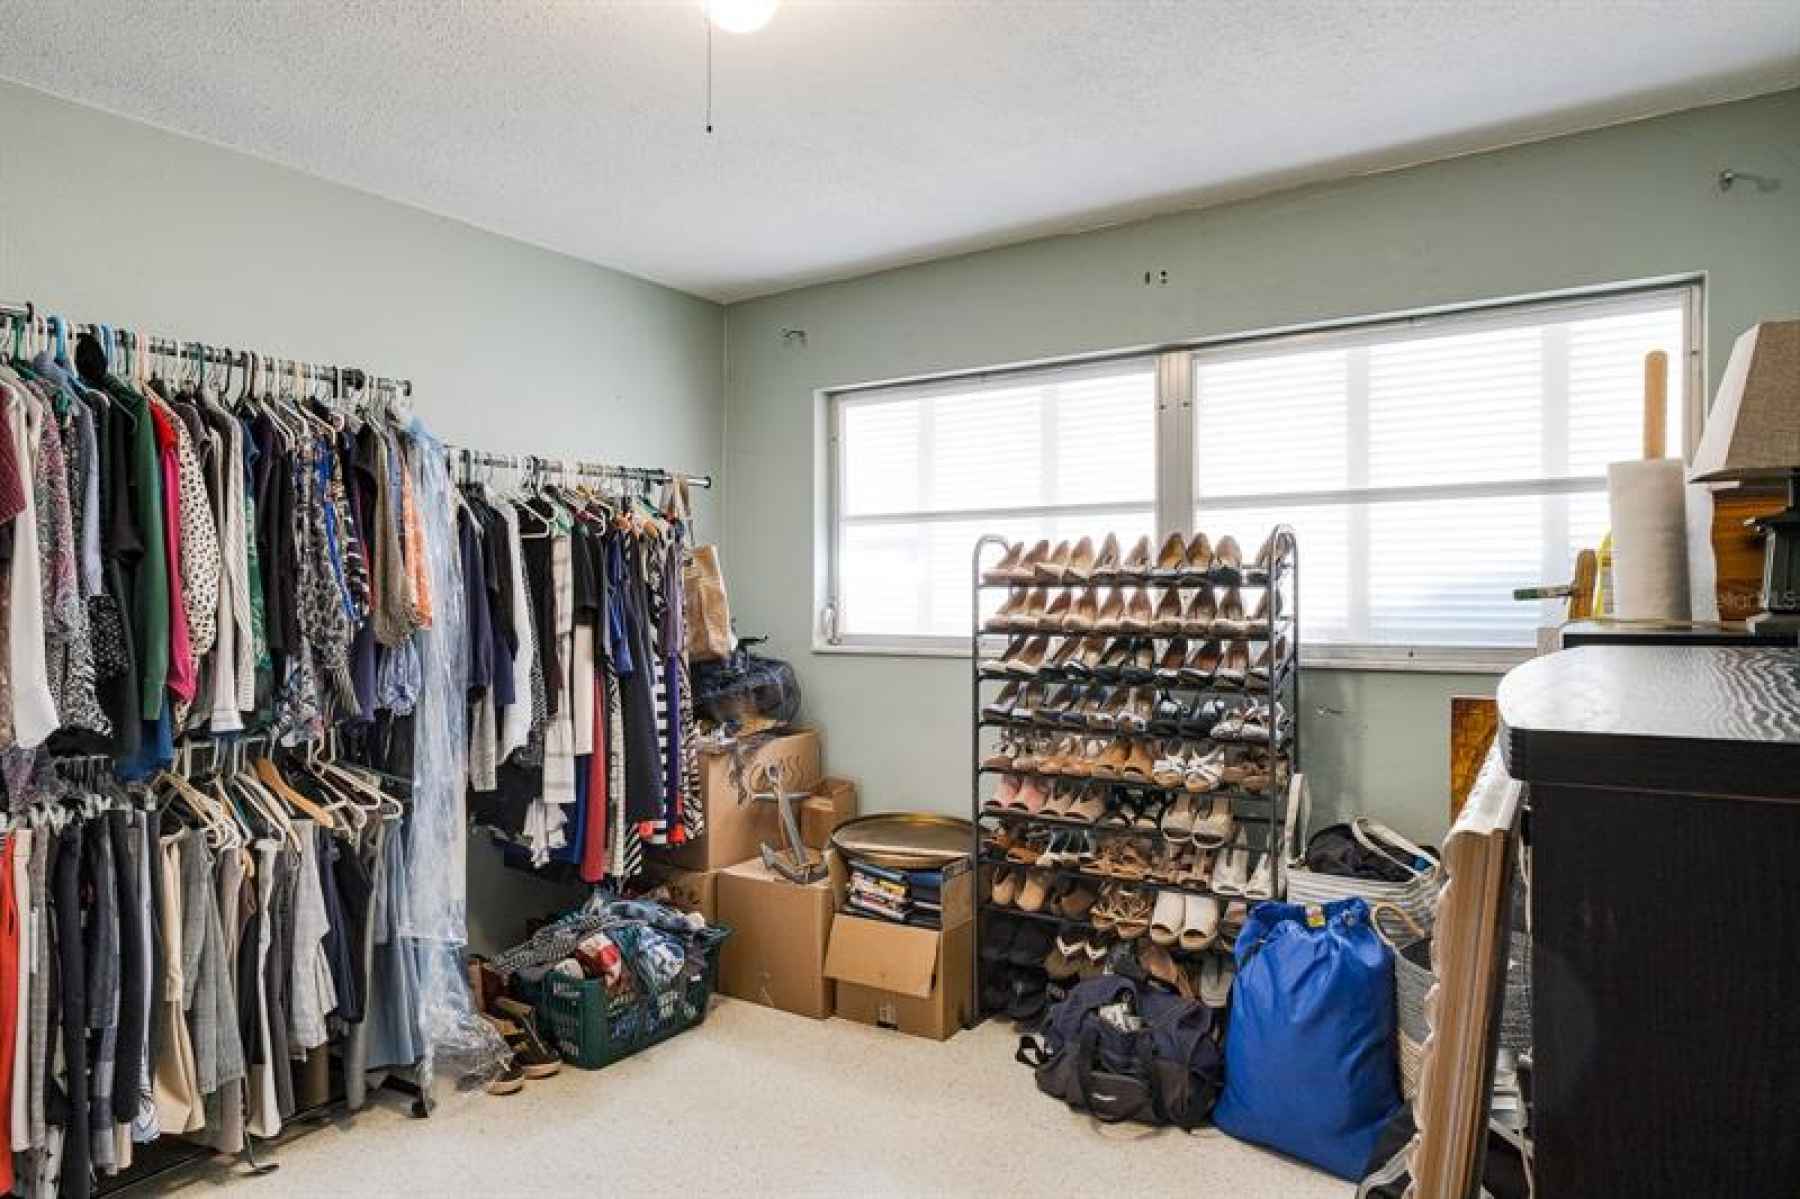 This closet is the size of a bedroom. Use your imagination to build your dream closet